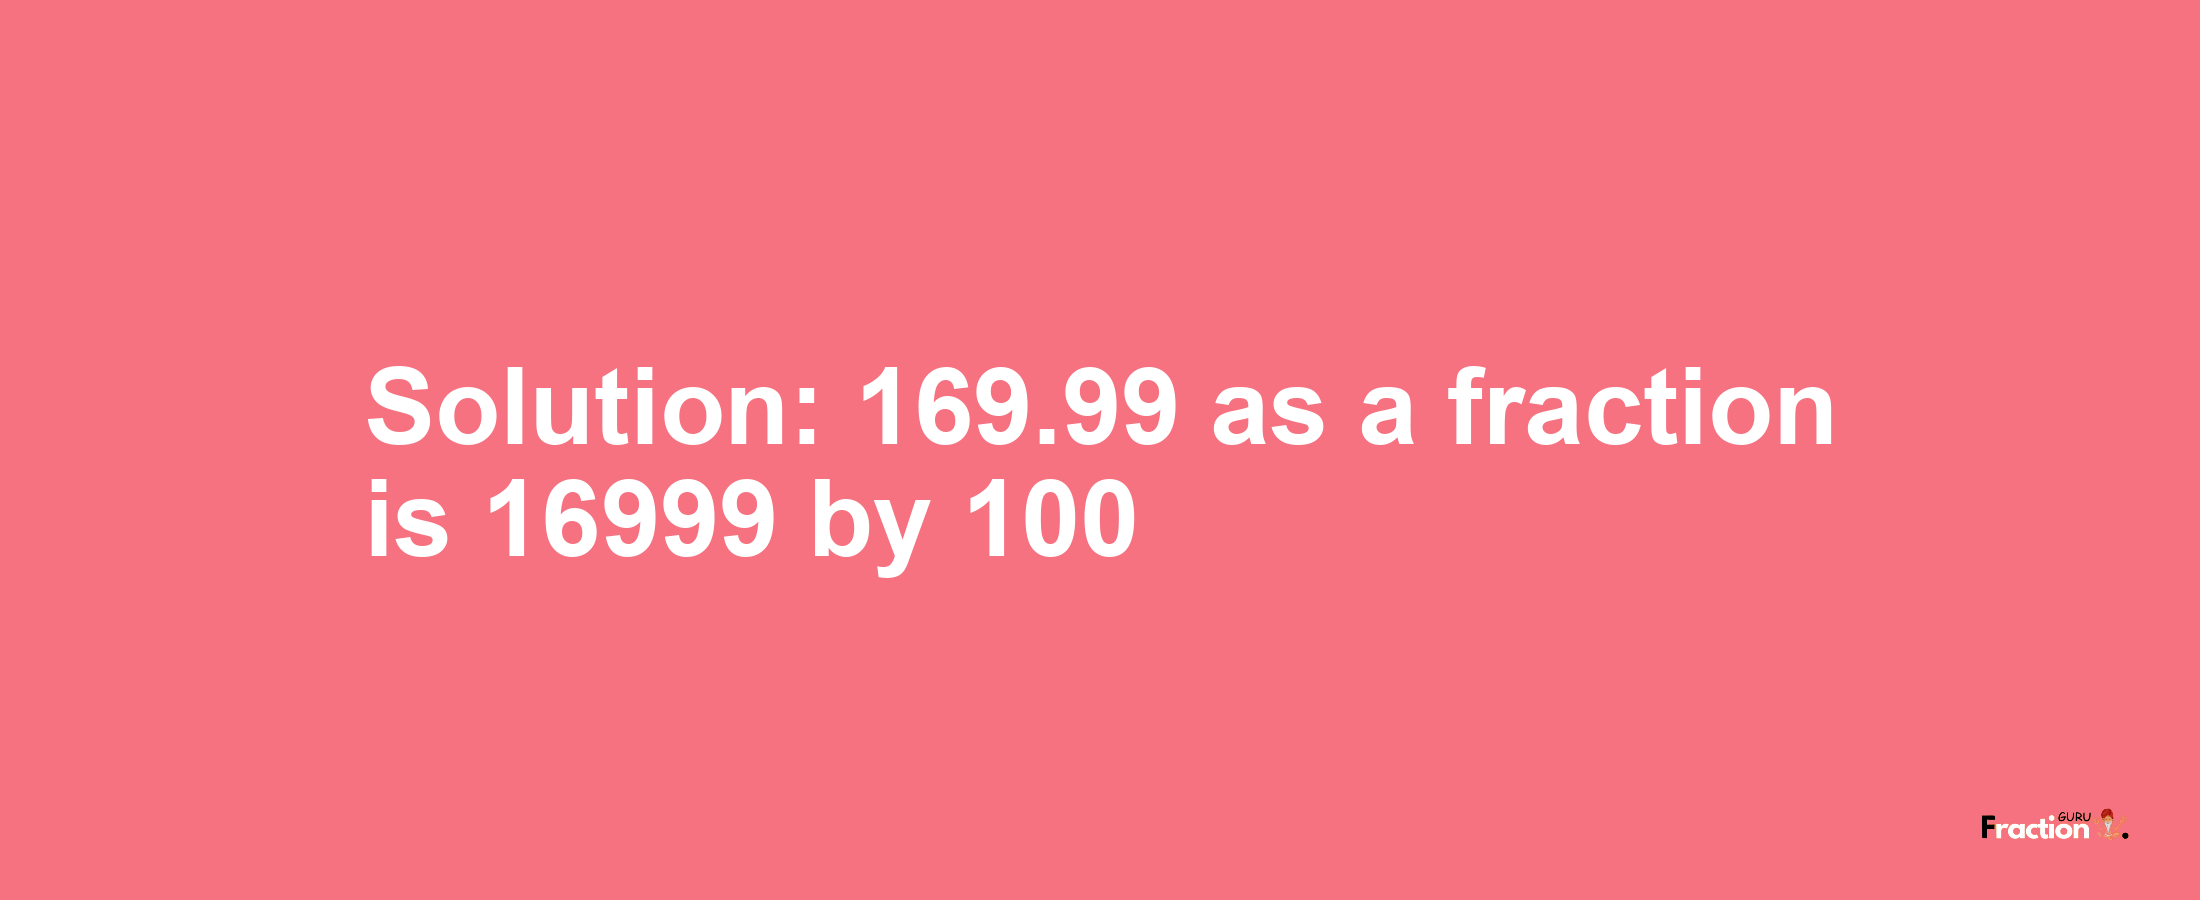 Solution:169.99 as a fraction is 16999/100